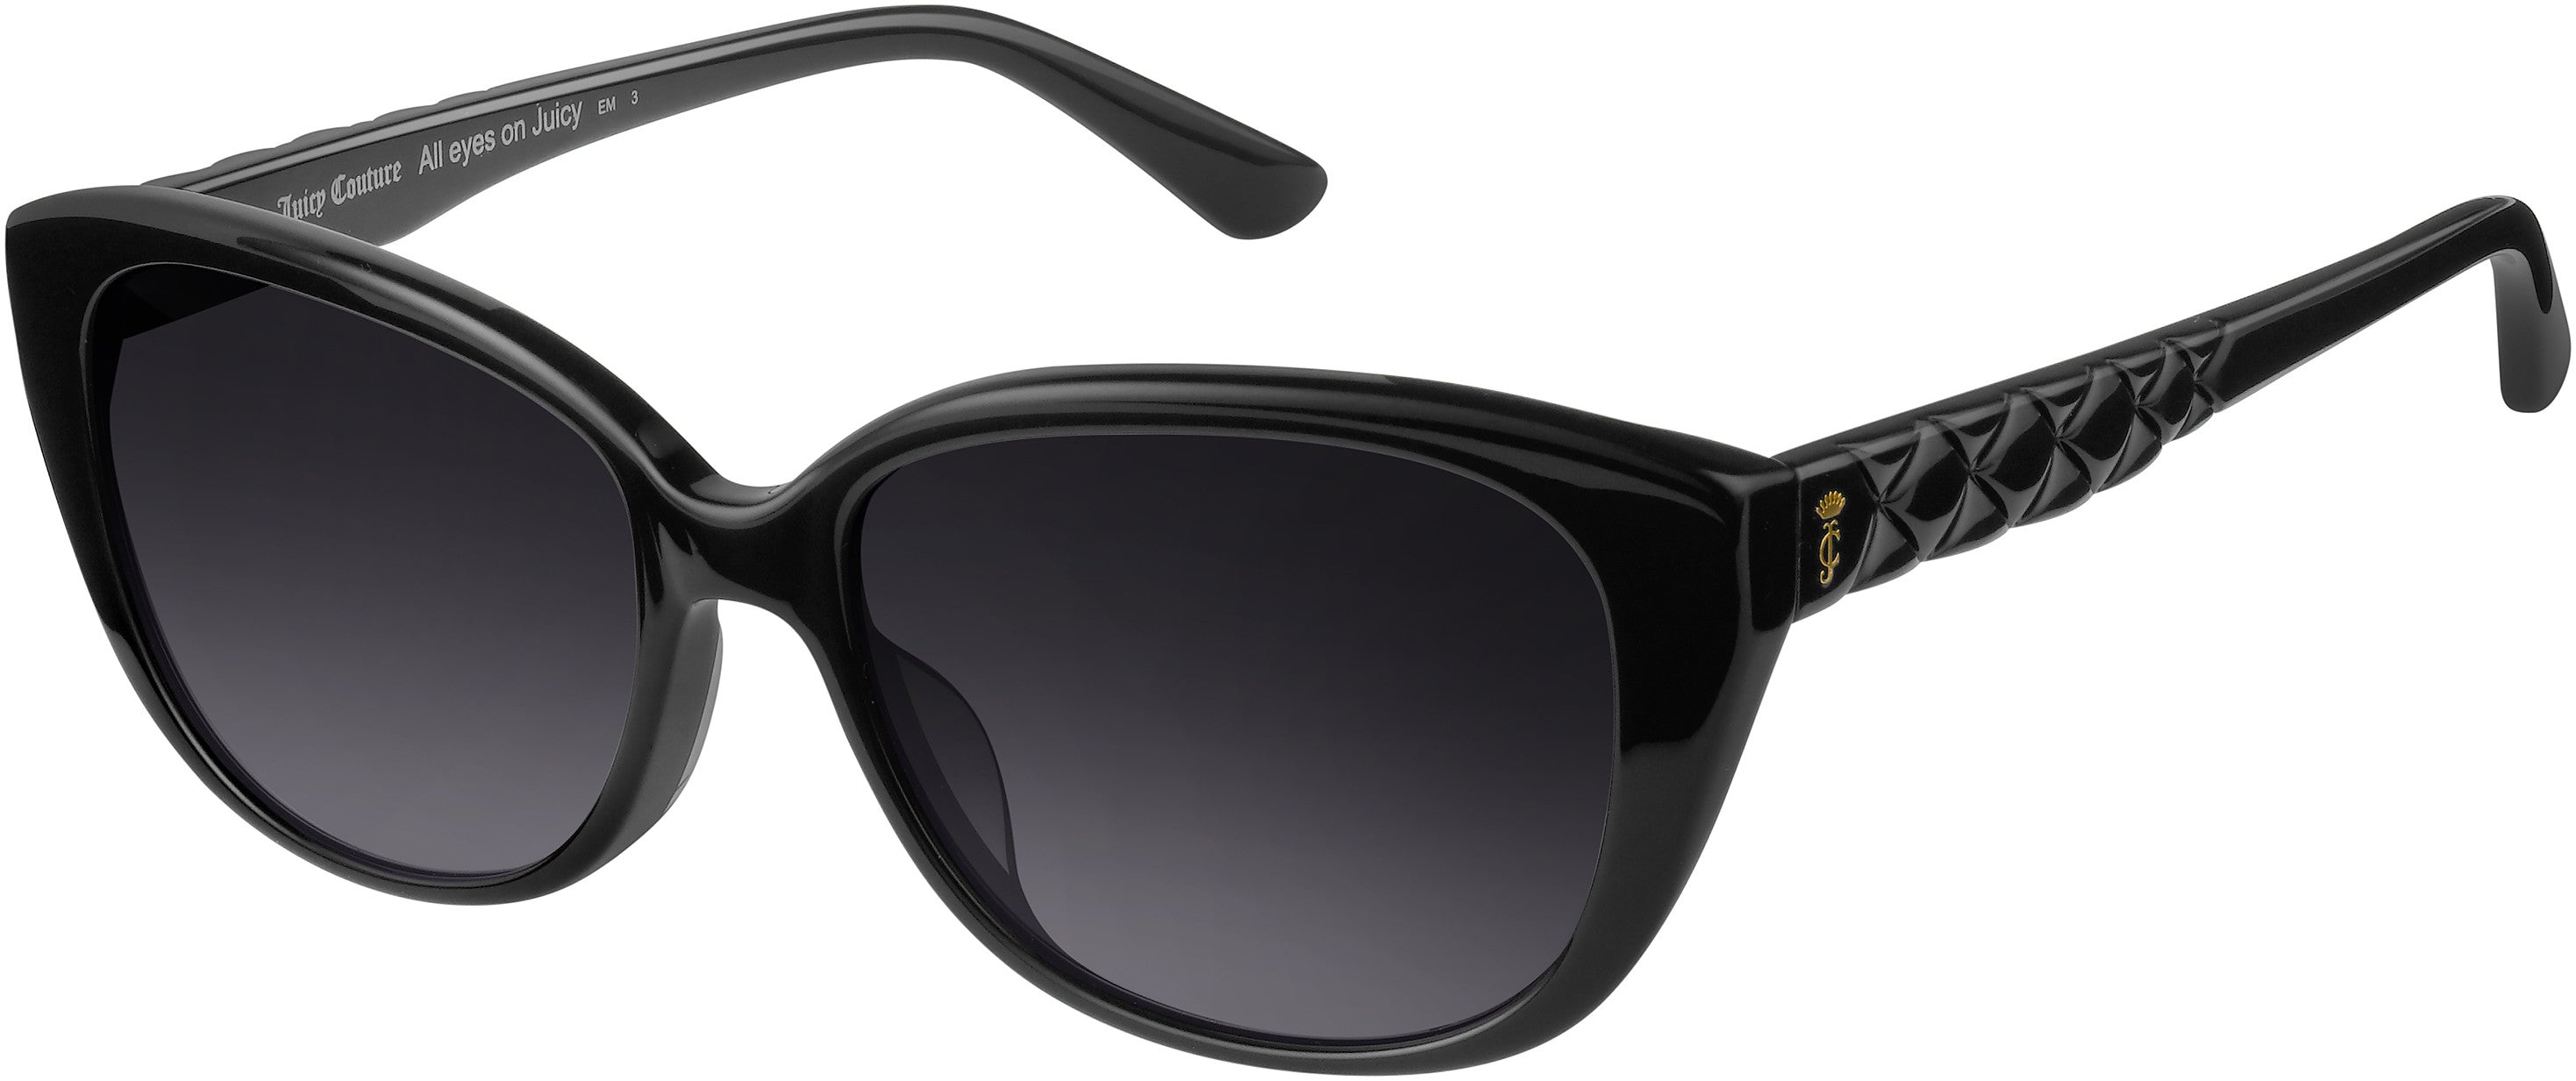 Juicy Couture Juicy 600/S Oval Modified Sunglasses 0807-0807  Black (9O Dark Gray Gradient)